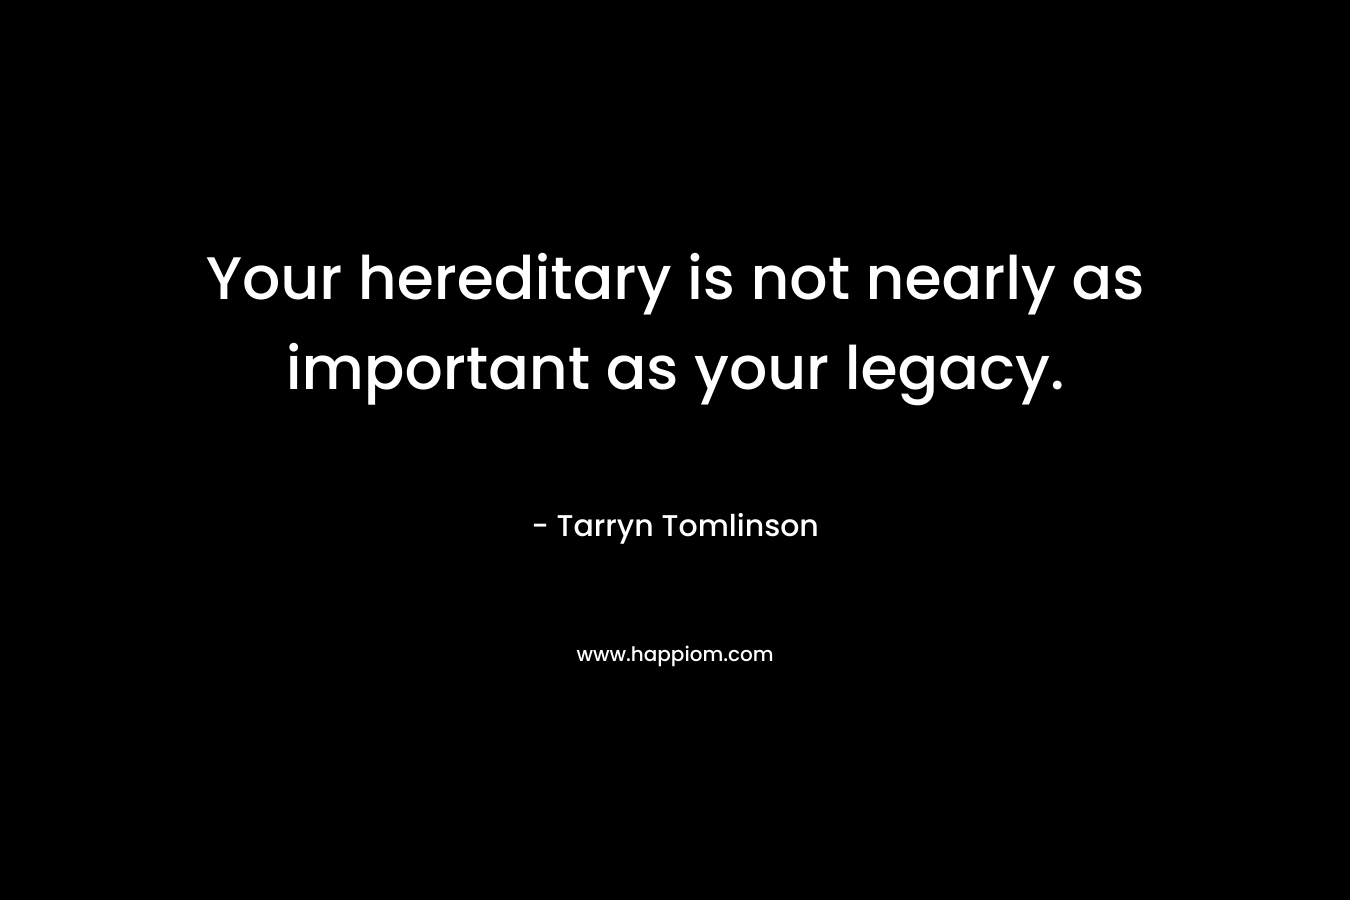 Your hereditary is not nearly as important as your legacy. – Tarryn Tomlinson